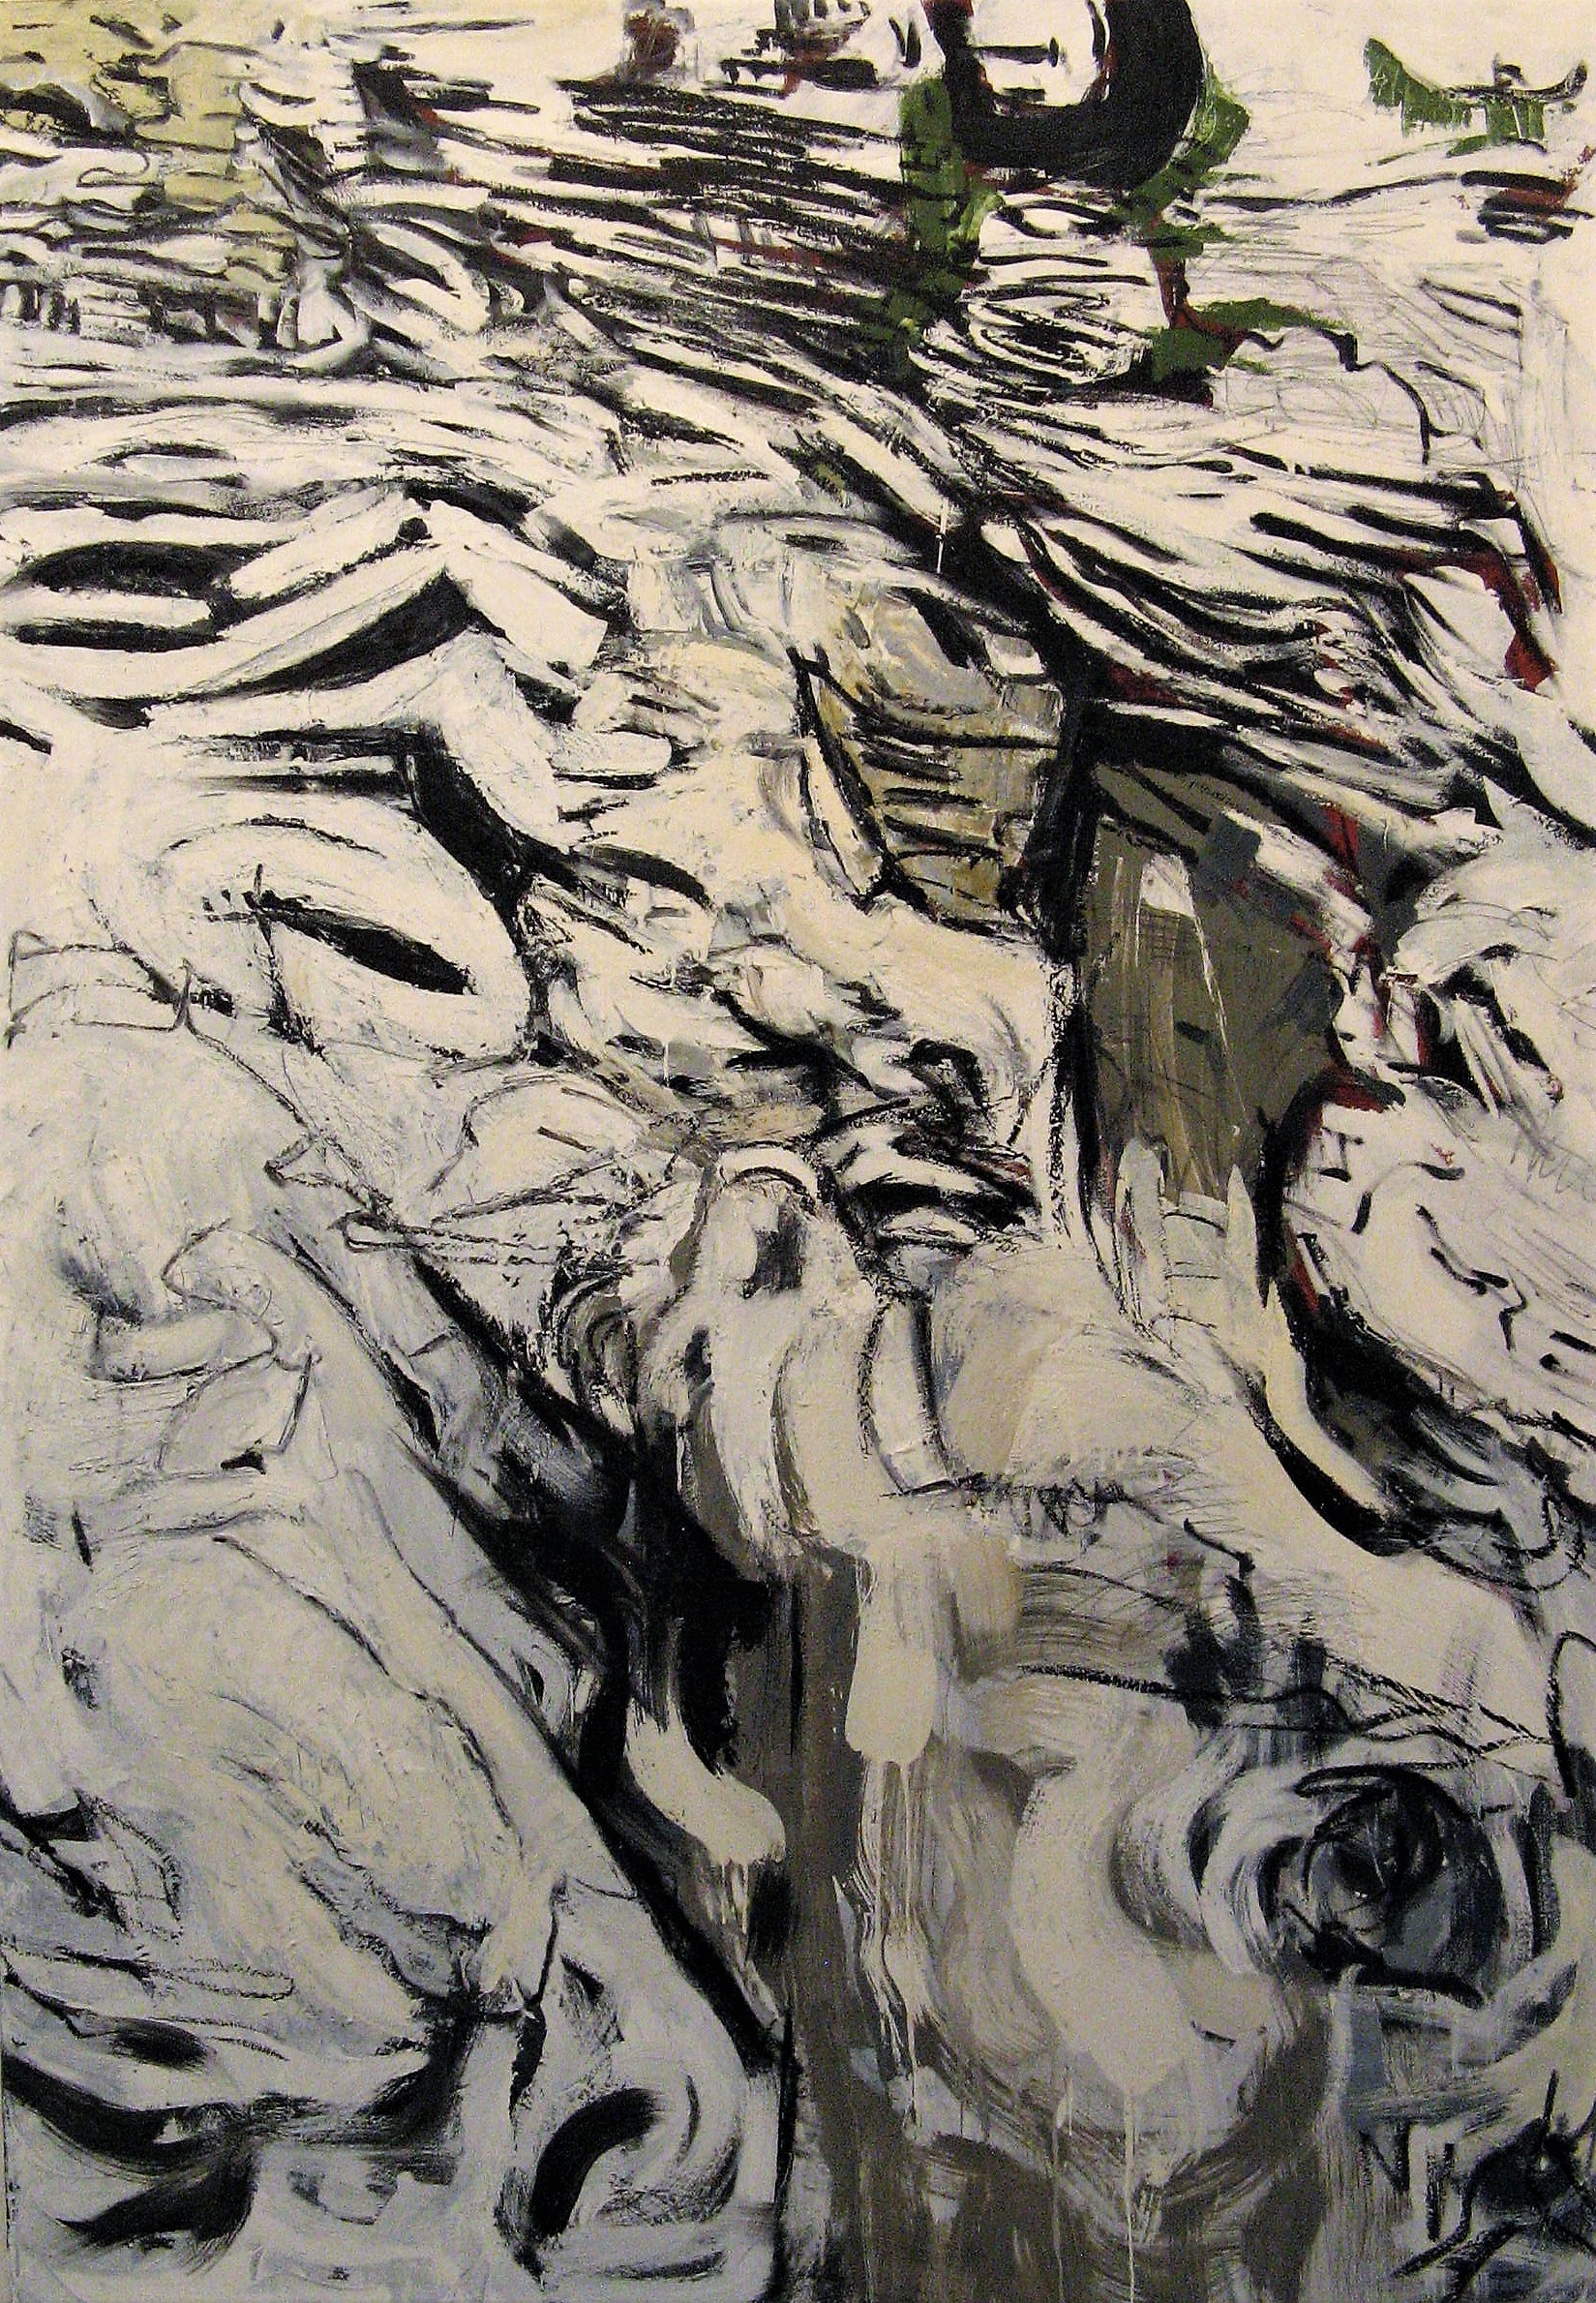  Iris Osterman,  Ravine , Oil, graphite and charcoal on canvas, 42x60 